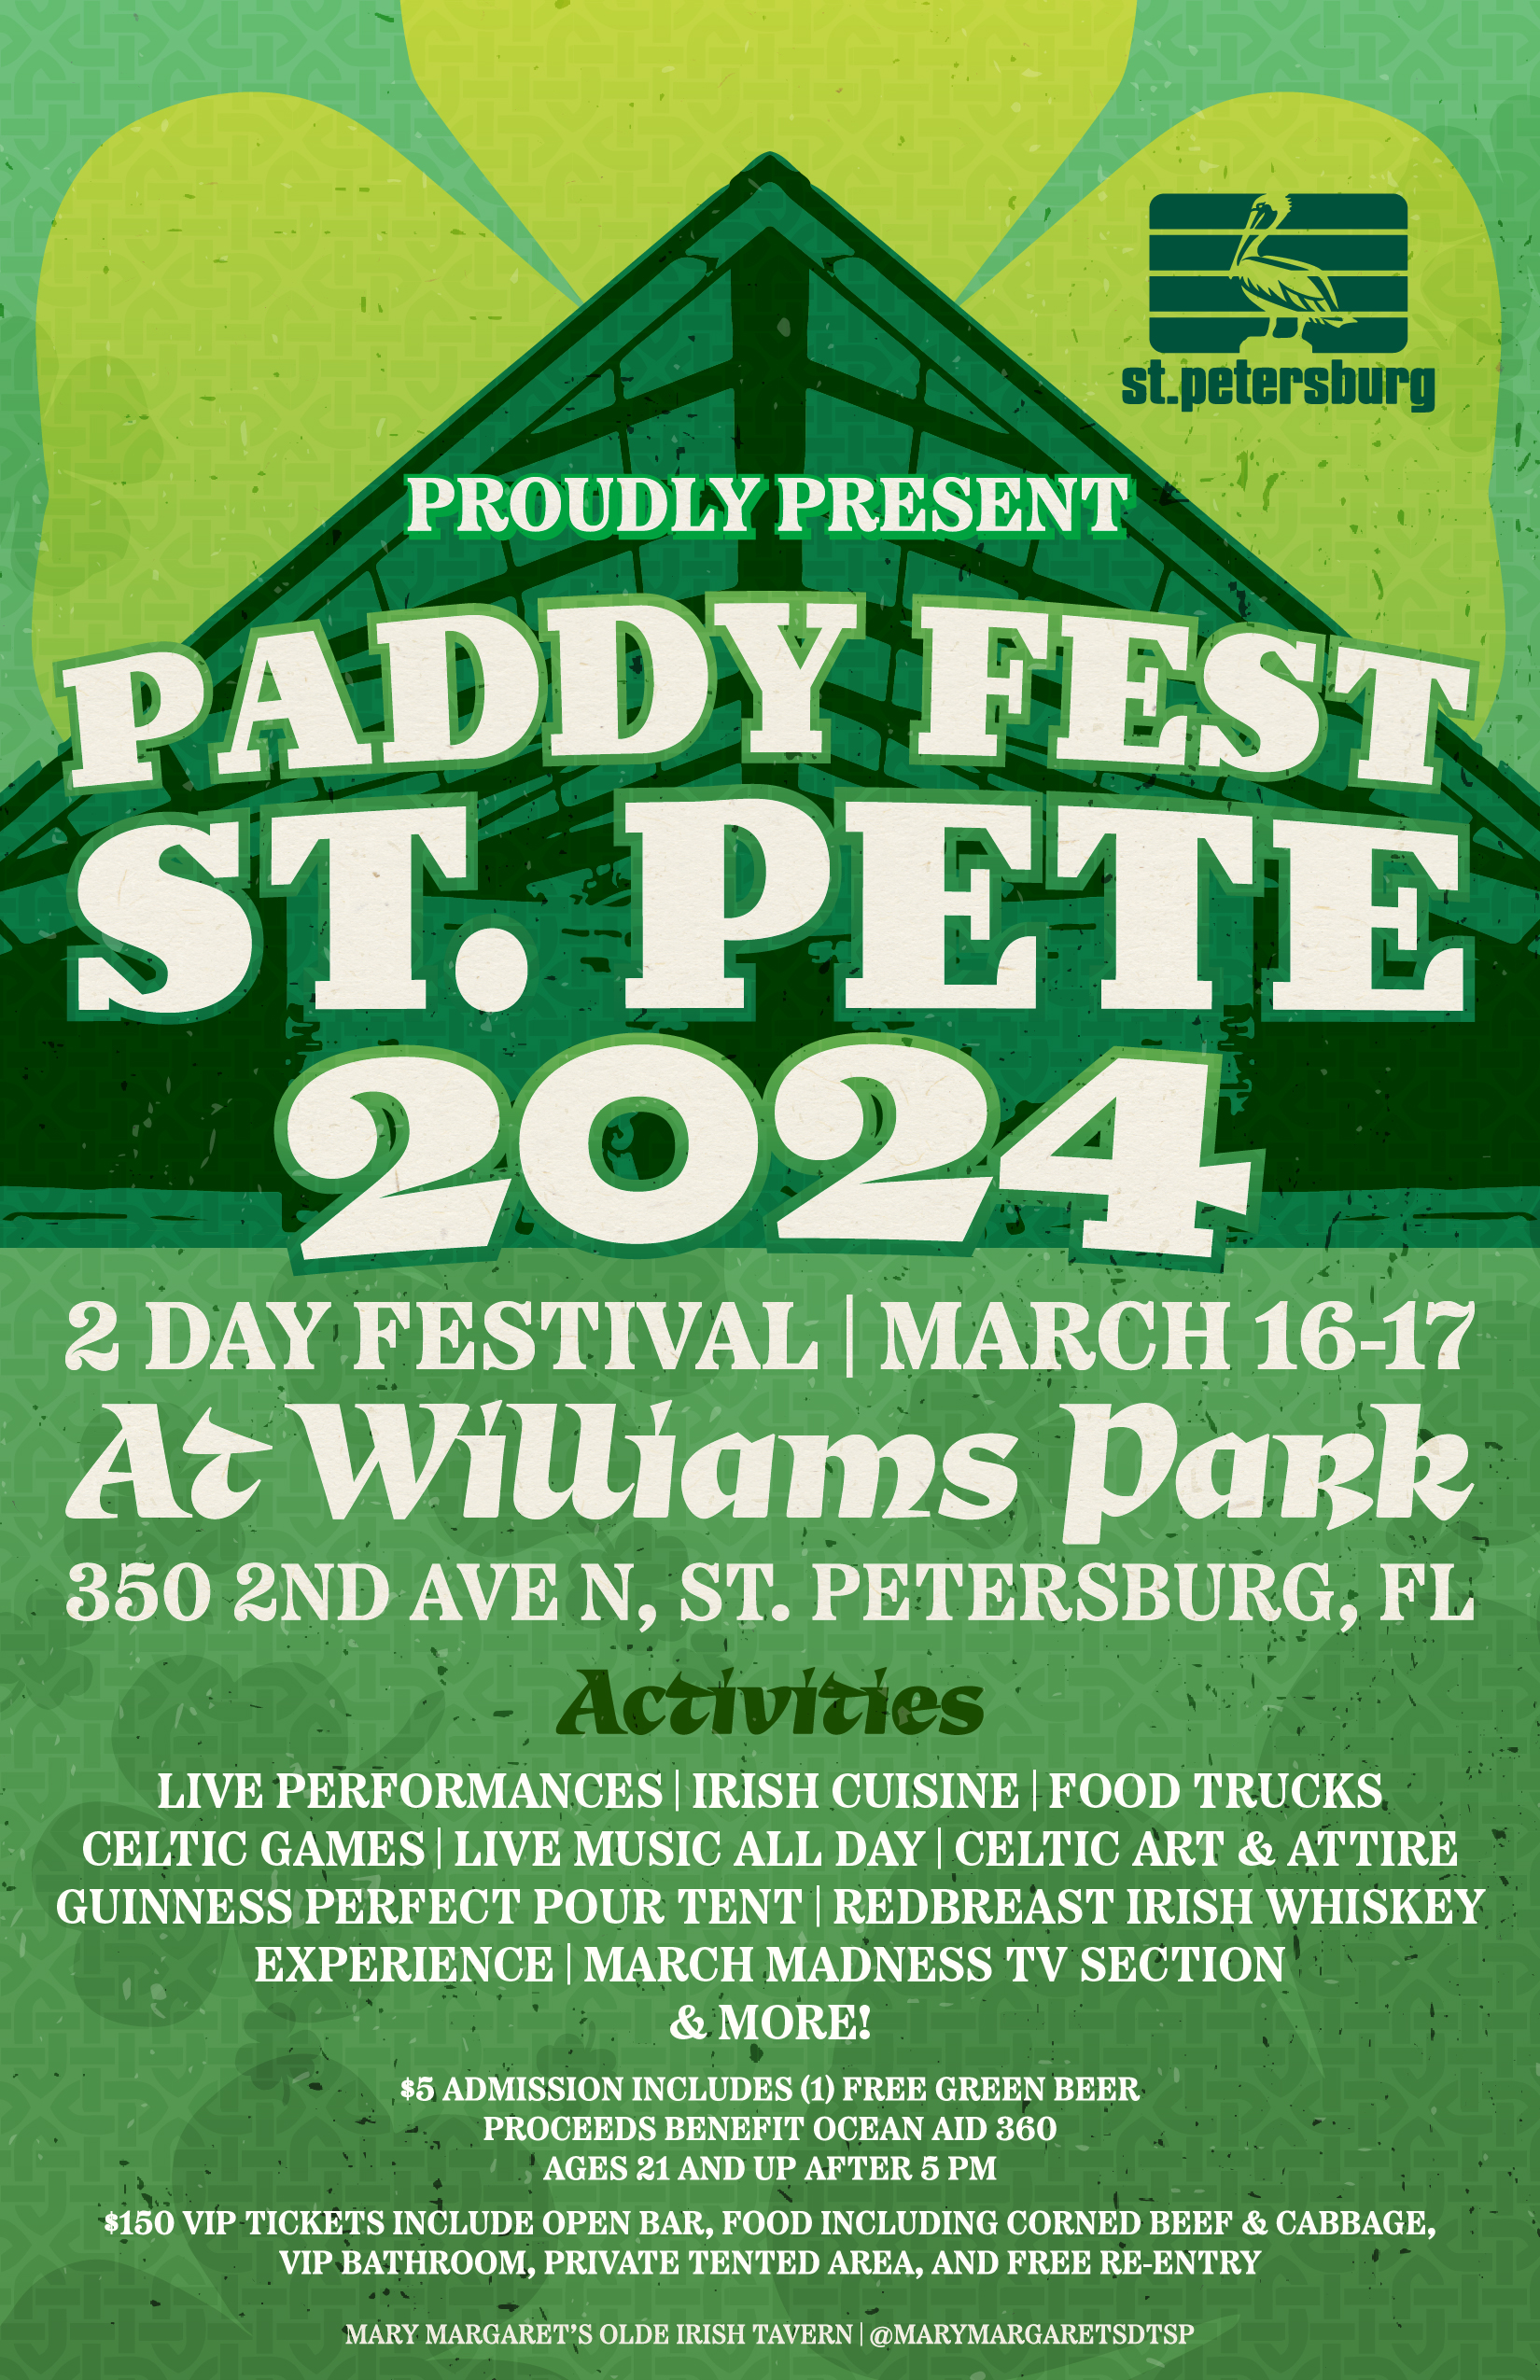 Downtown St. Pete’s Paddy Fest to Feature Dunedin Pipe Band, Scariff Irish Step Dancers, Sean Walsh, Cage, Chad McDonald and More